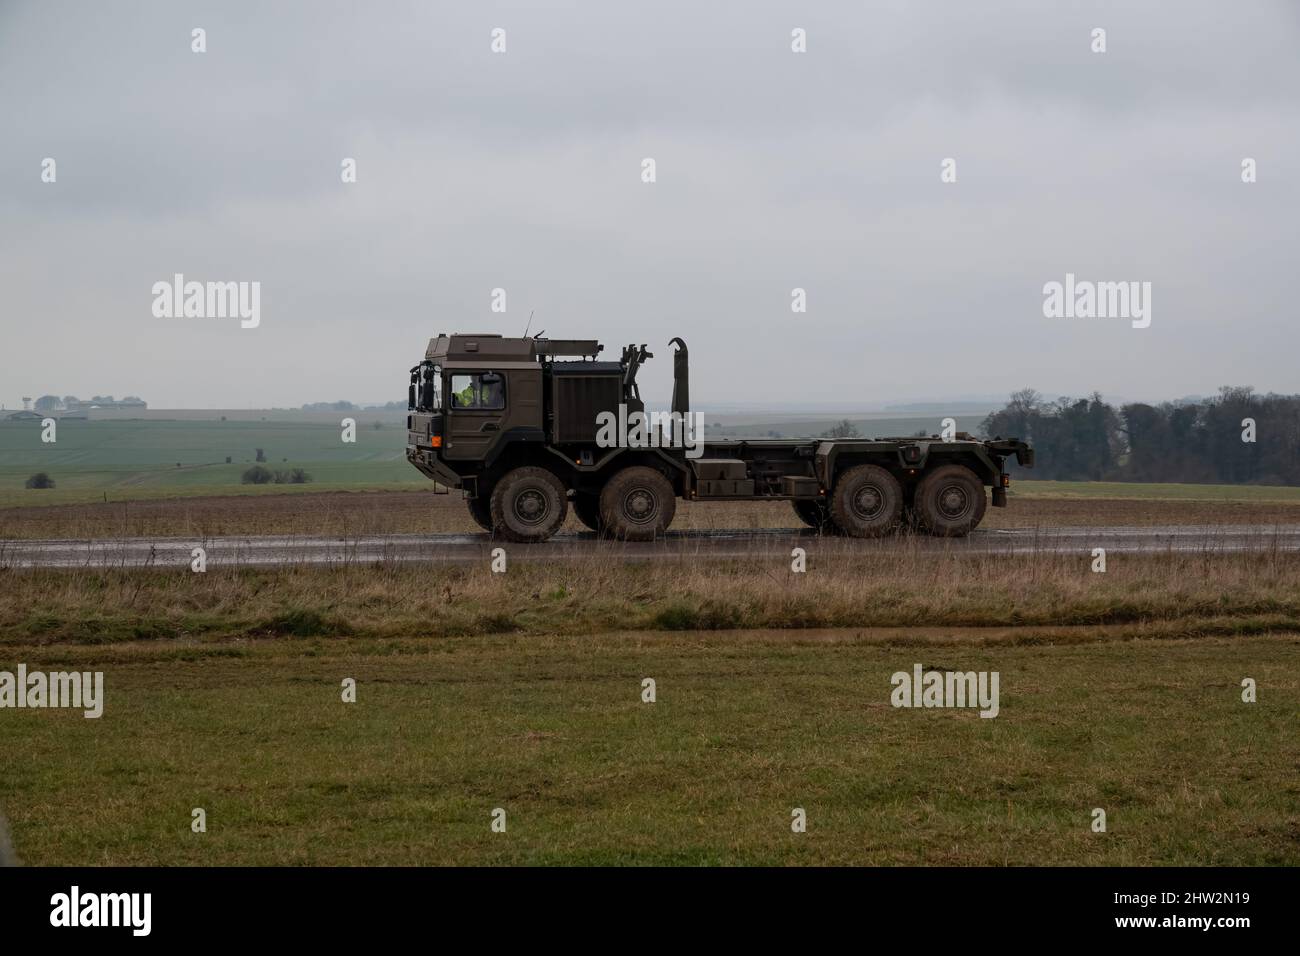 British army MAN HX77 SV 8x8 EPLS Heavy Utility Truck in action on a military exercise Stock Photo